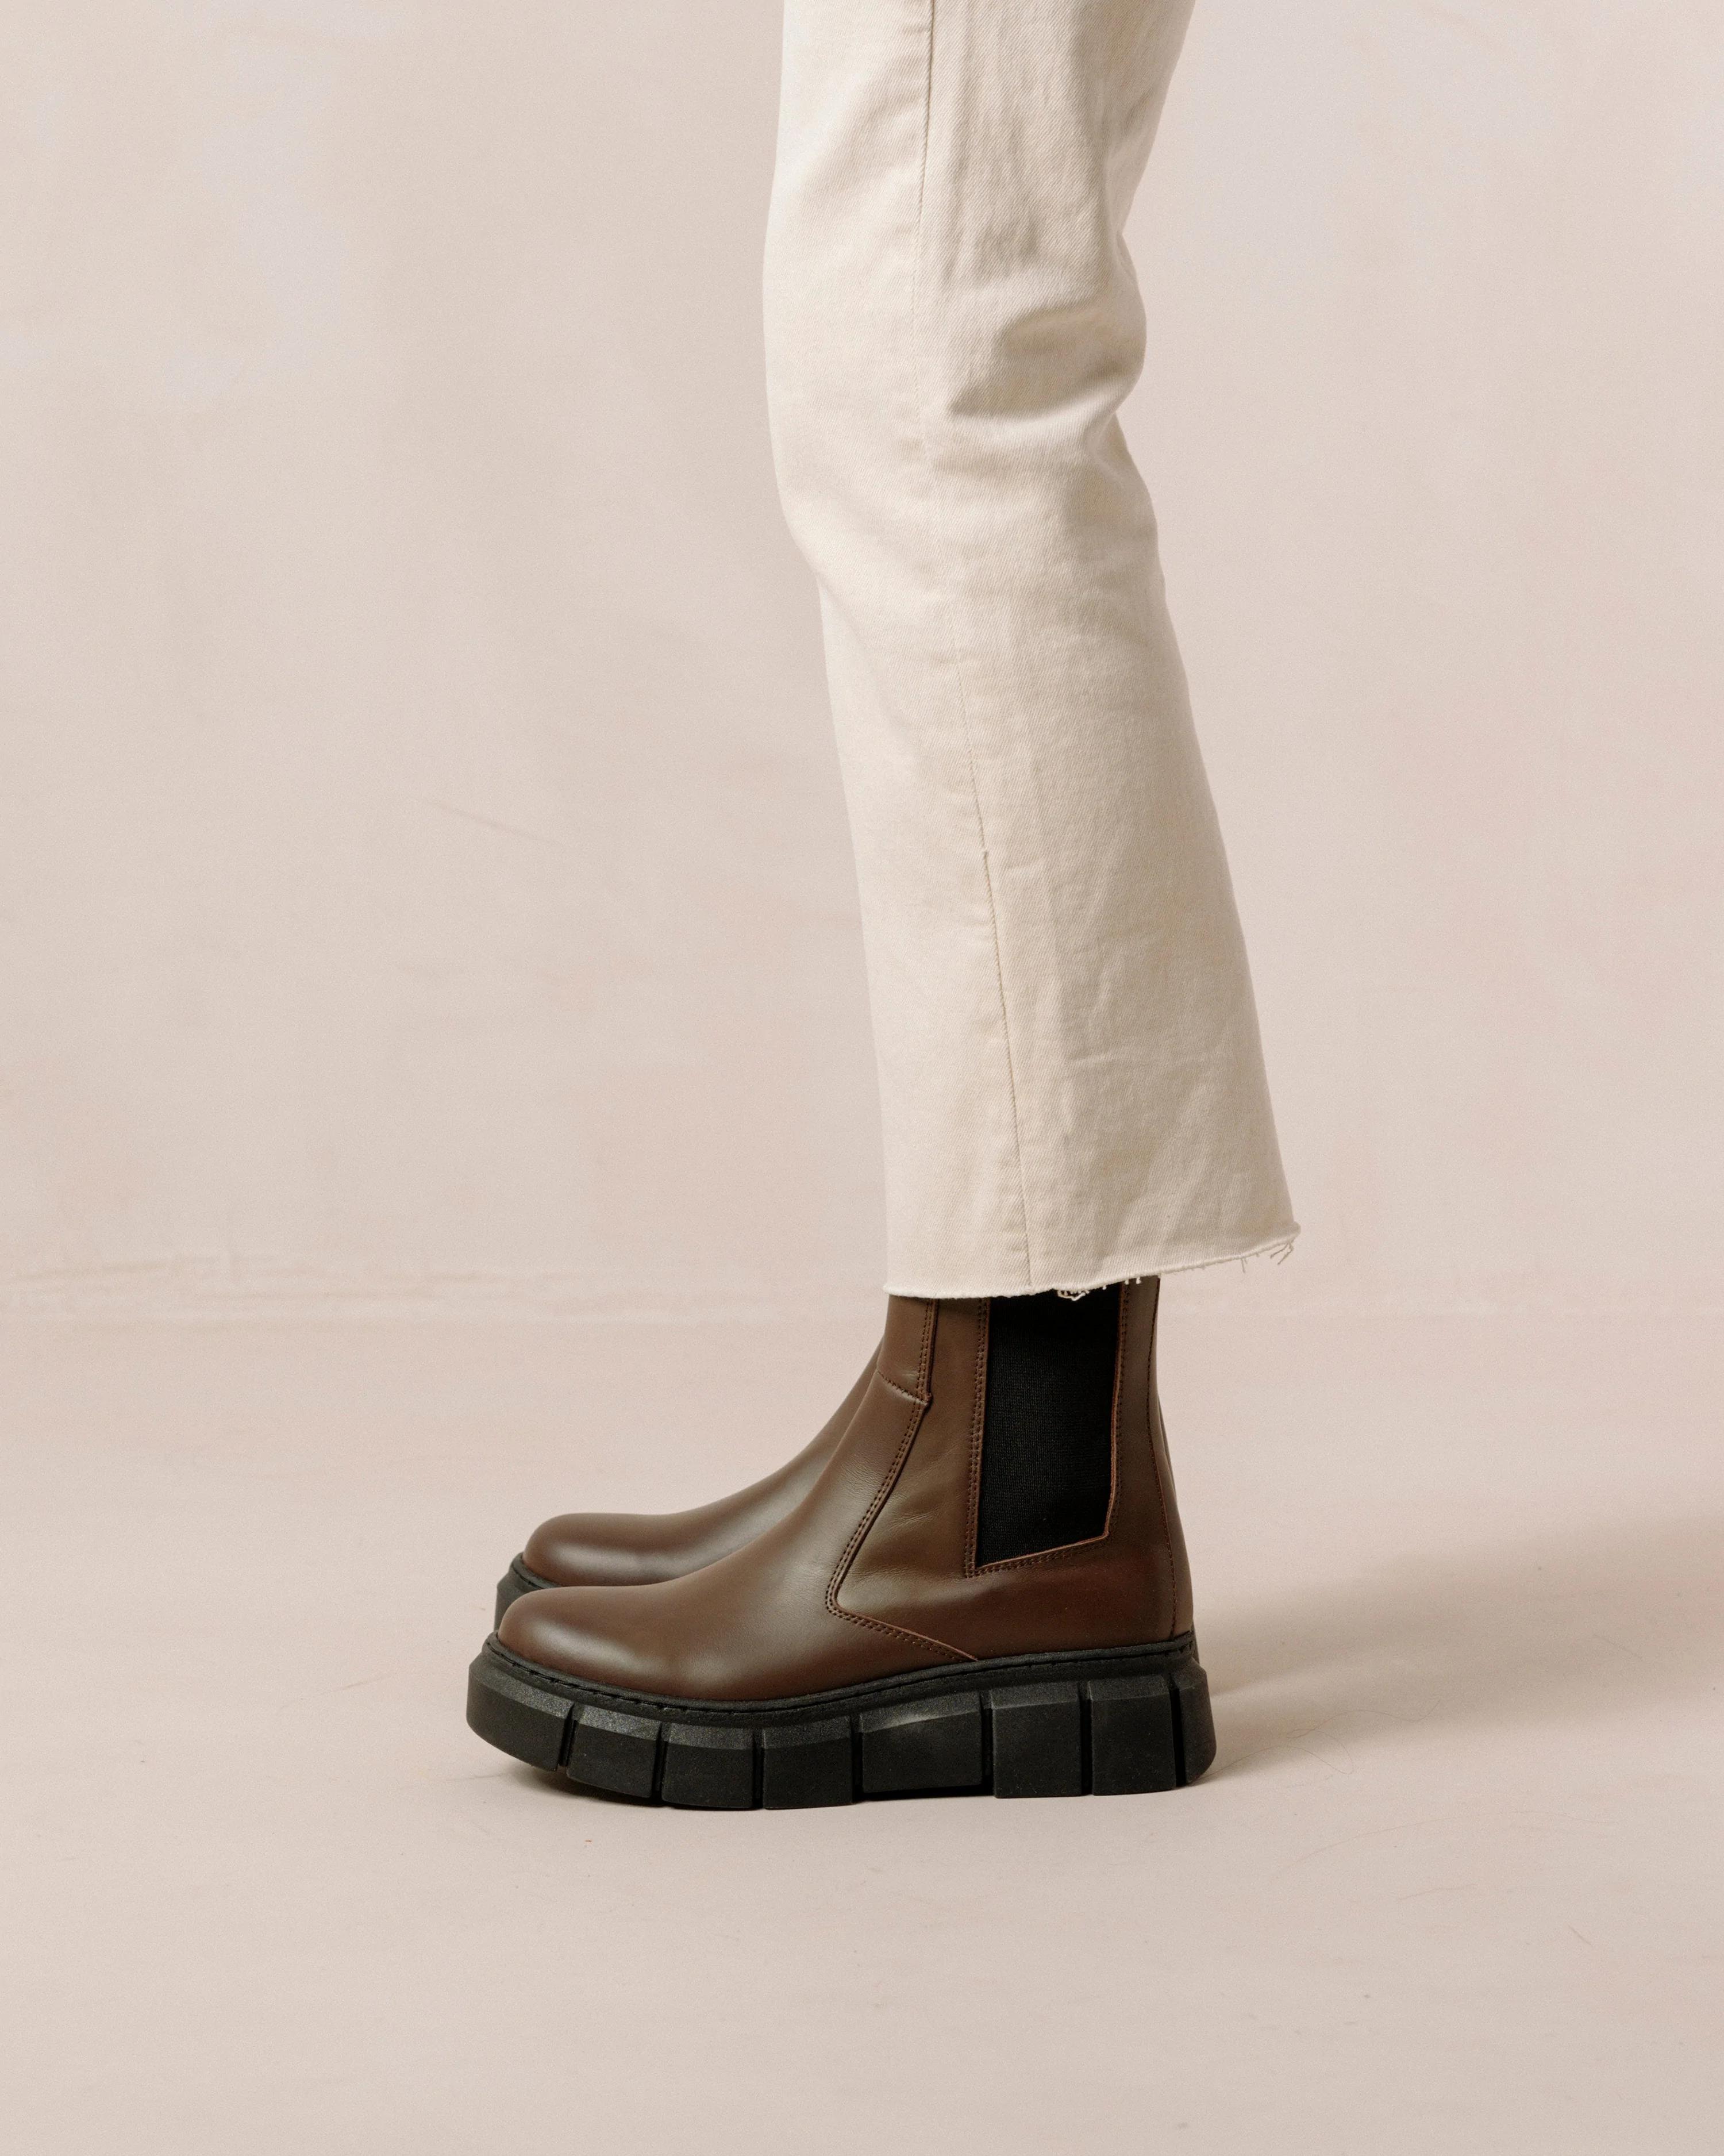 Product Image for Armor Leather Boots, Coffee Brown